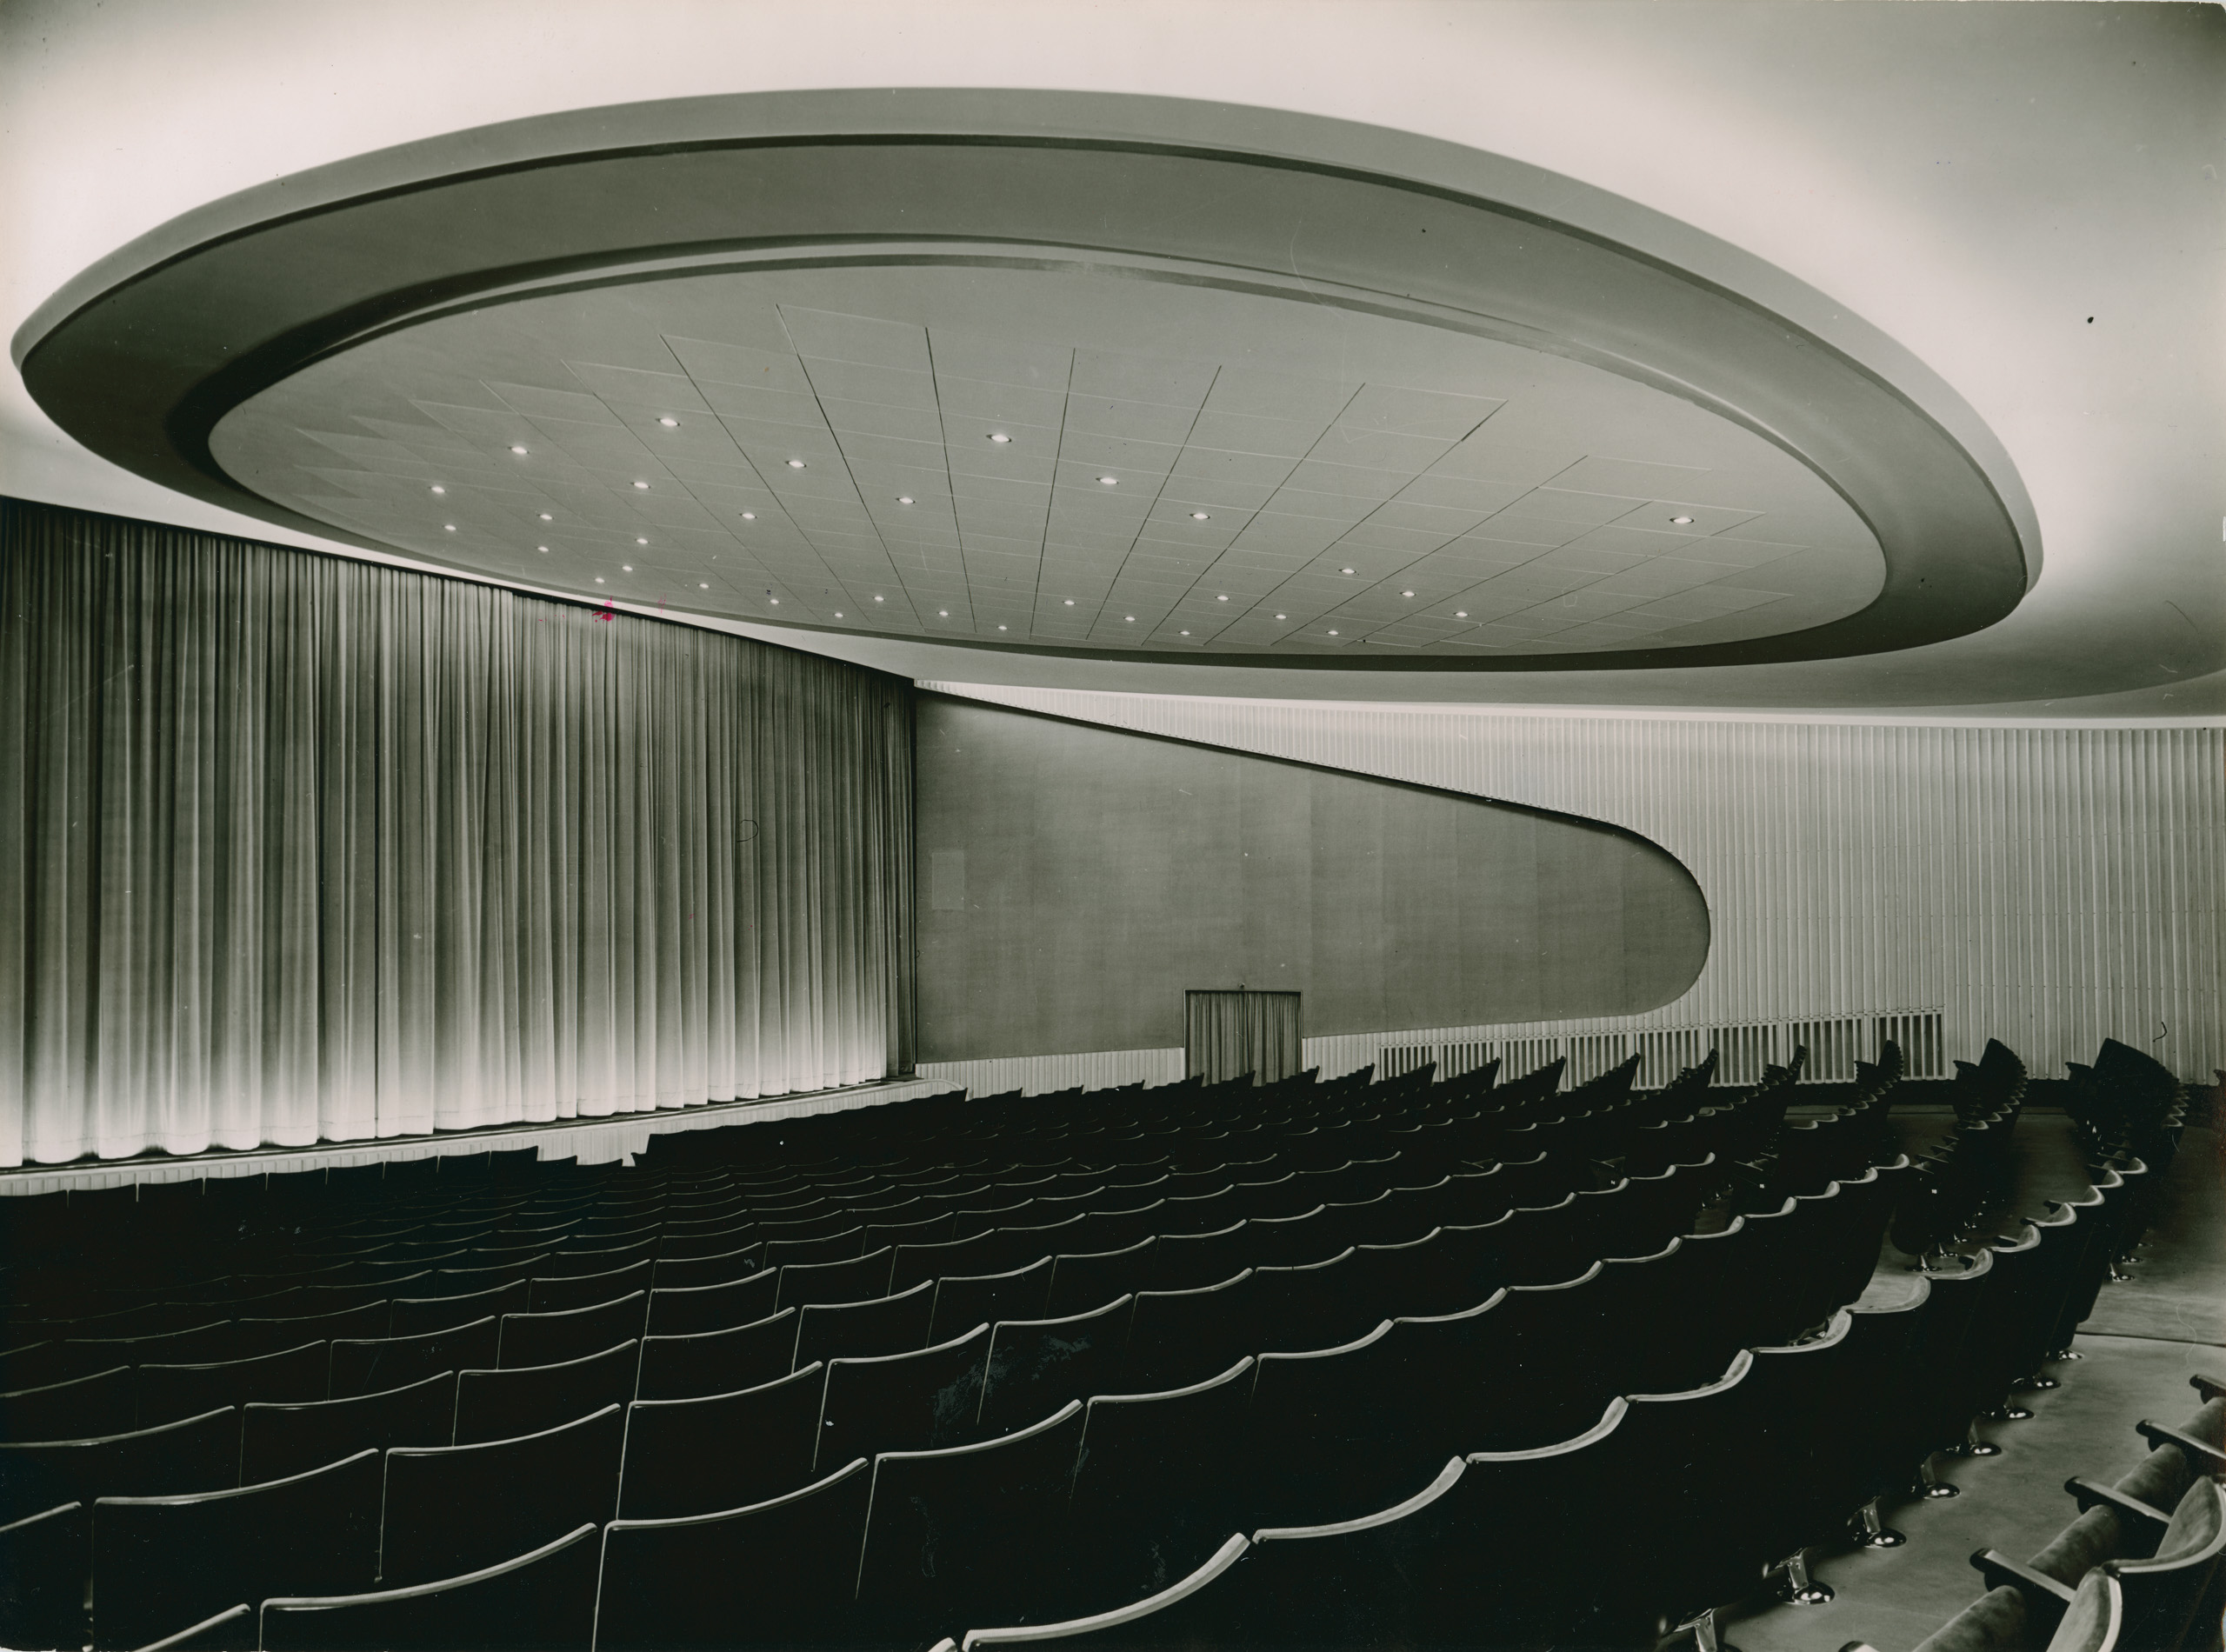 Black and white photo of the auditorium facing the screen